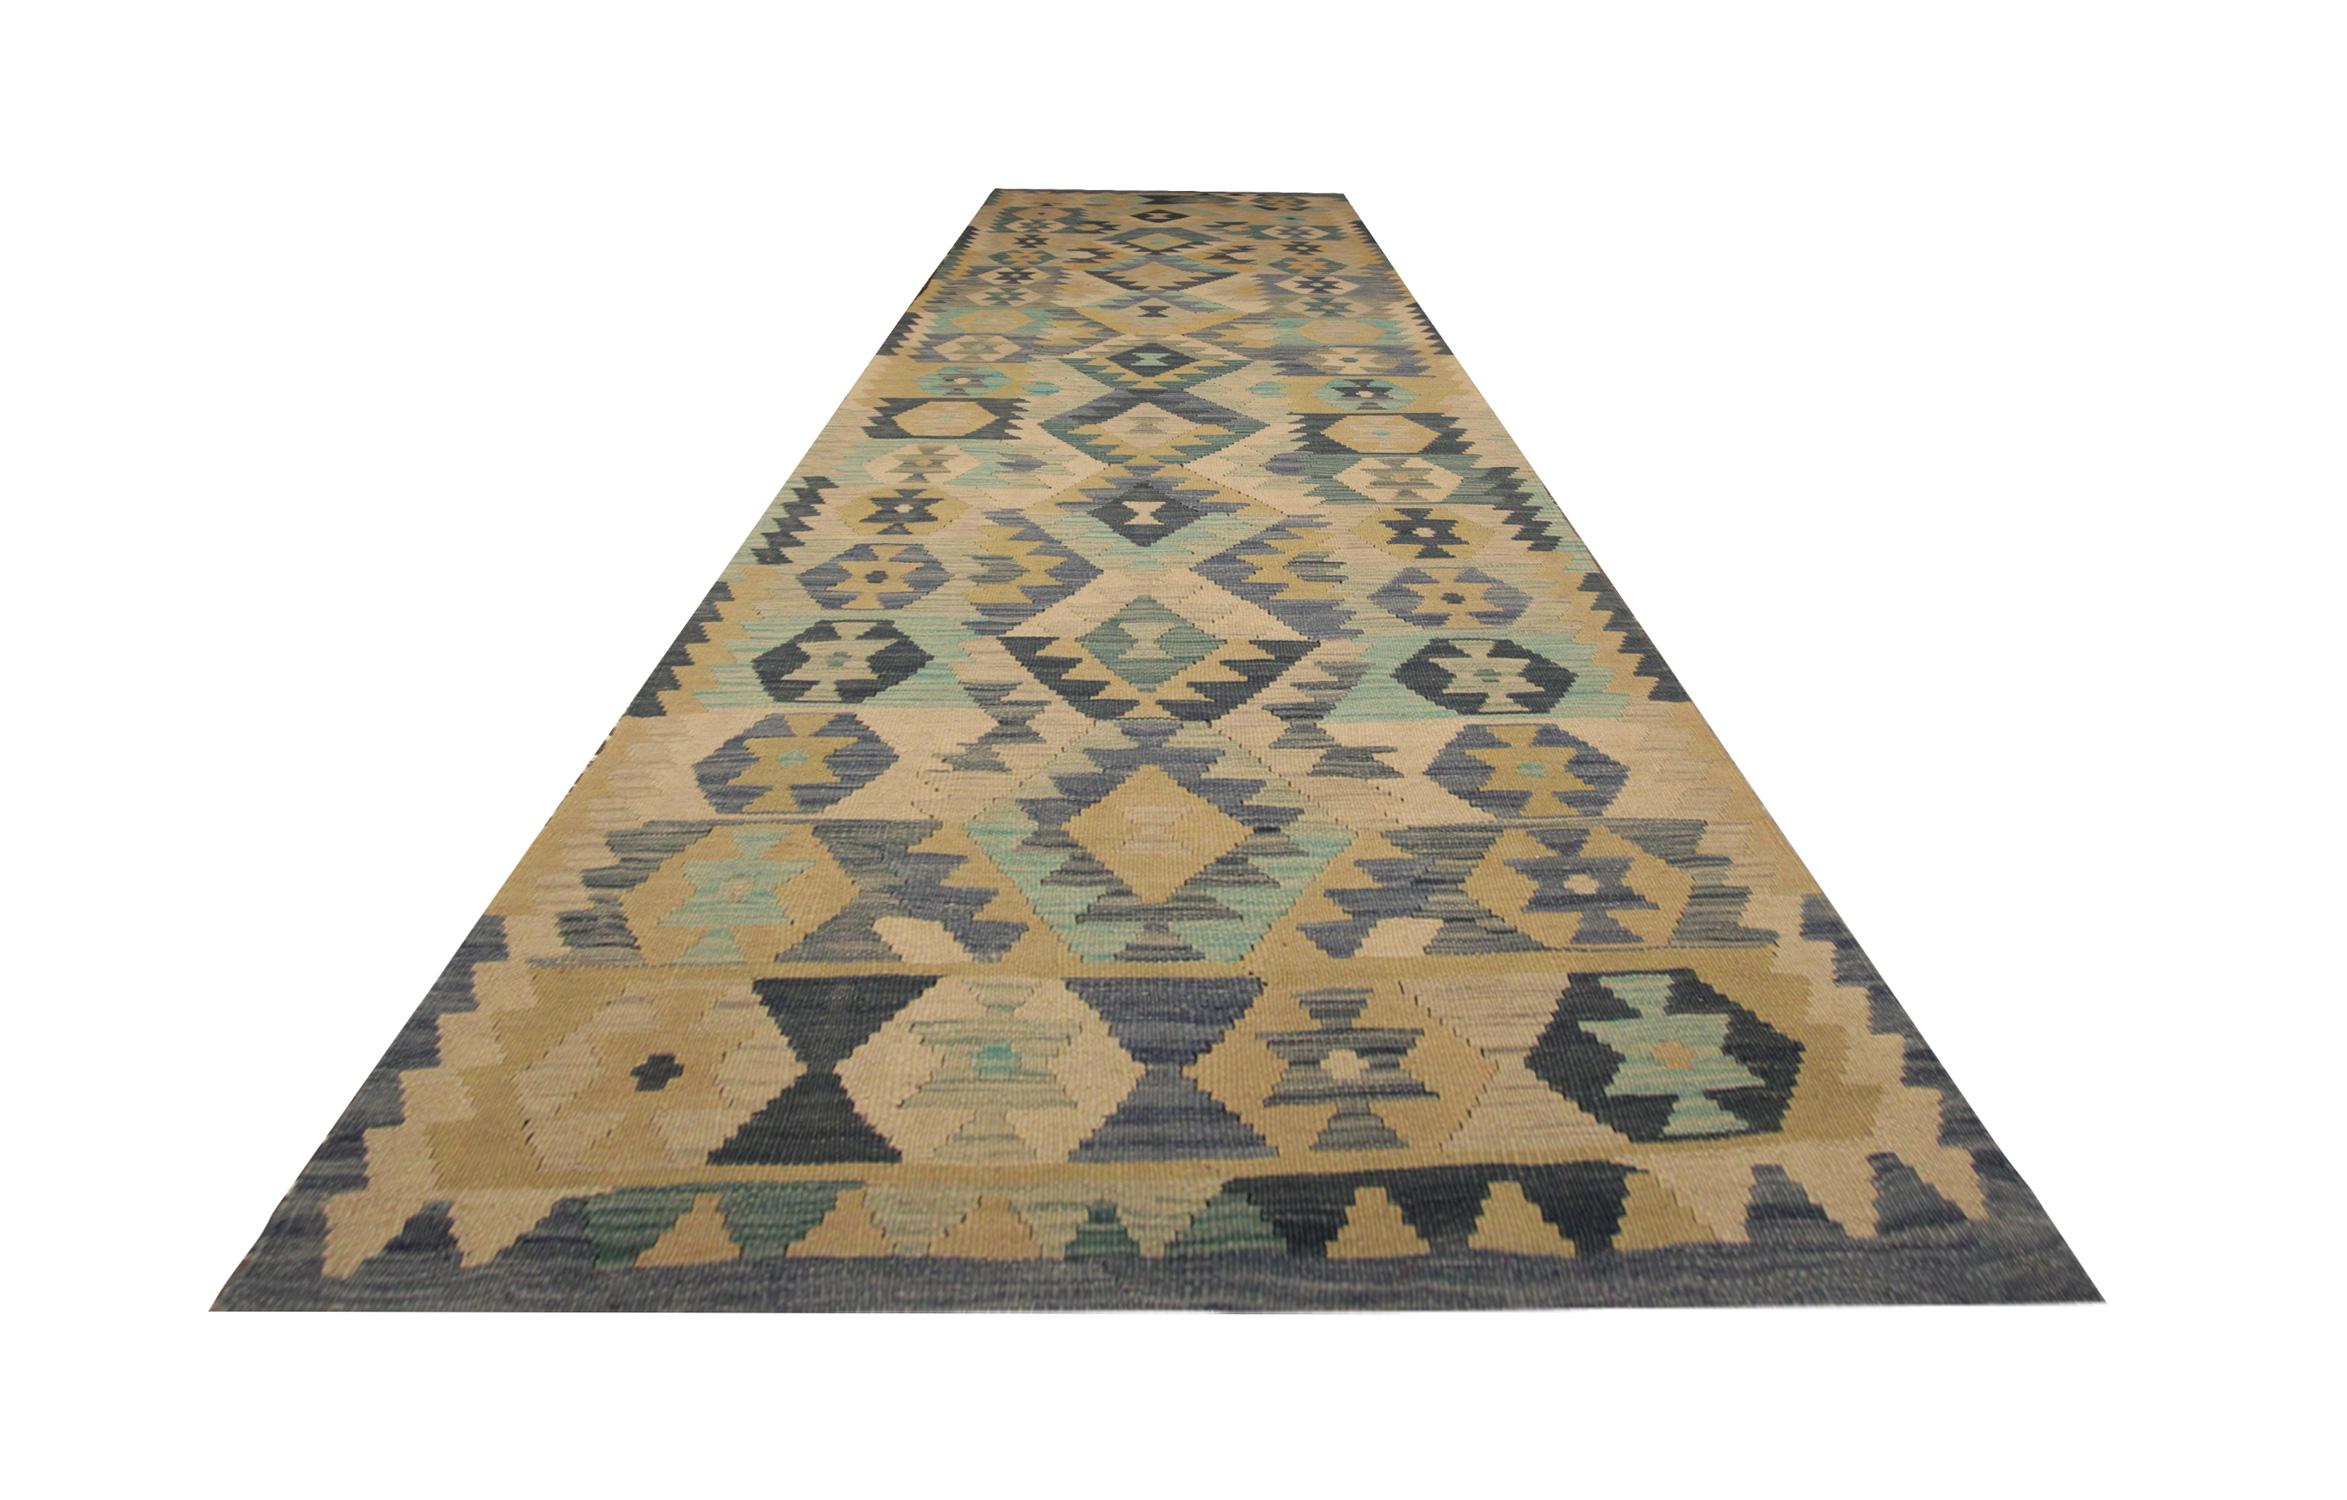 This fine wool kilim rug was woven by hand in Afghanistan in the early 21st century. The design features a bold geometric pattern woven in a repeating design, displaying a rich colour palette including cream, blue and beige. The colour and design in